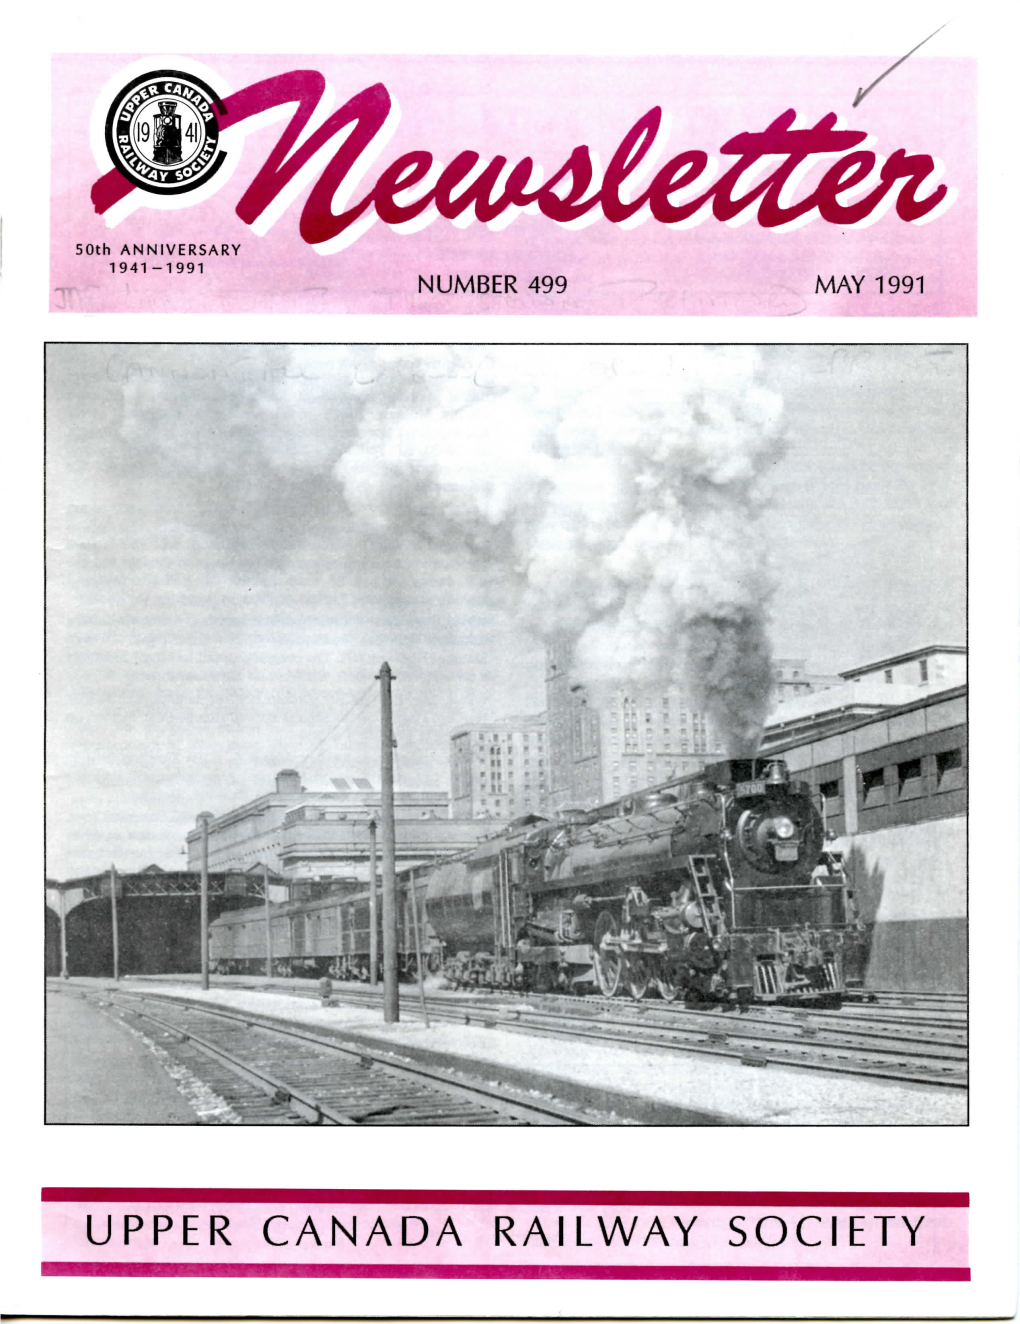 UPPER CANADA RAILWAY SOCIETY 2 * UCRS Newsletter « May 1991